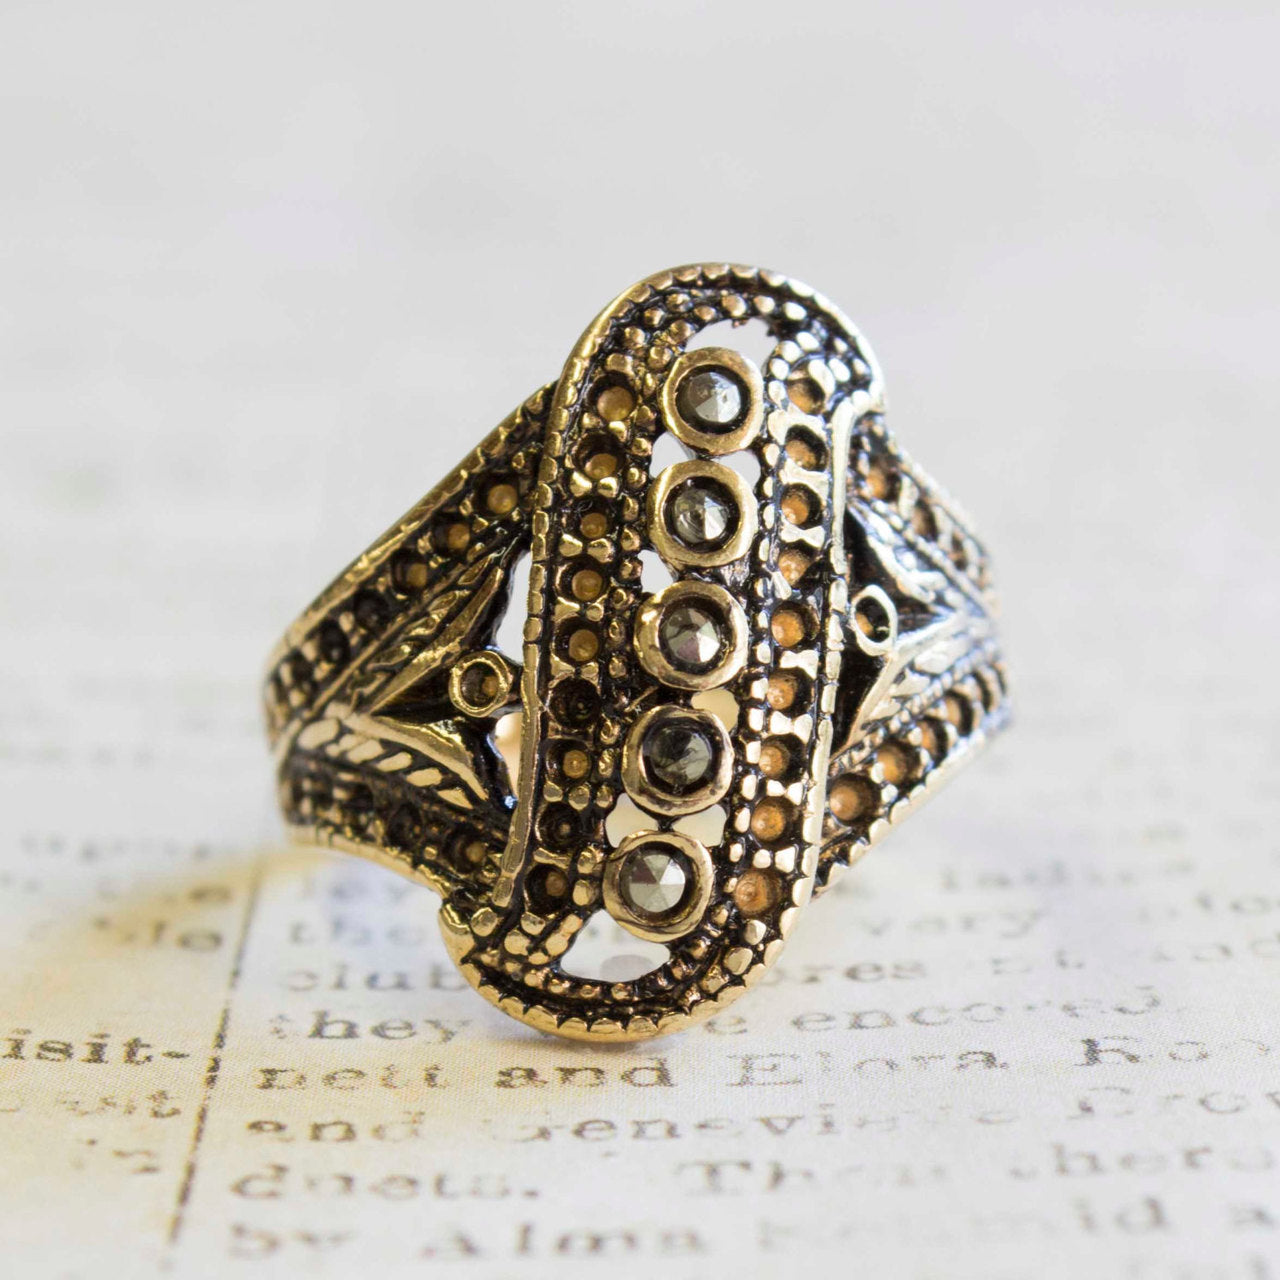 Vintage Genuine Marcasite Ring Antiqued 18k Yellow Gold Electroplated Filigree Setting Made in USA